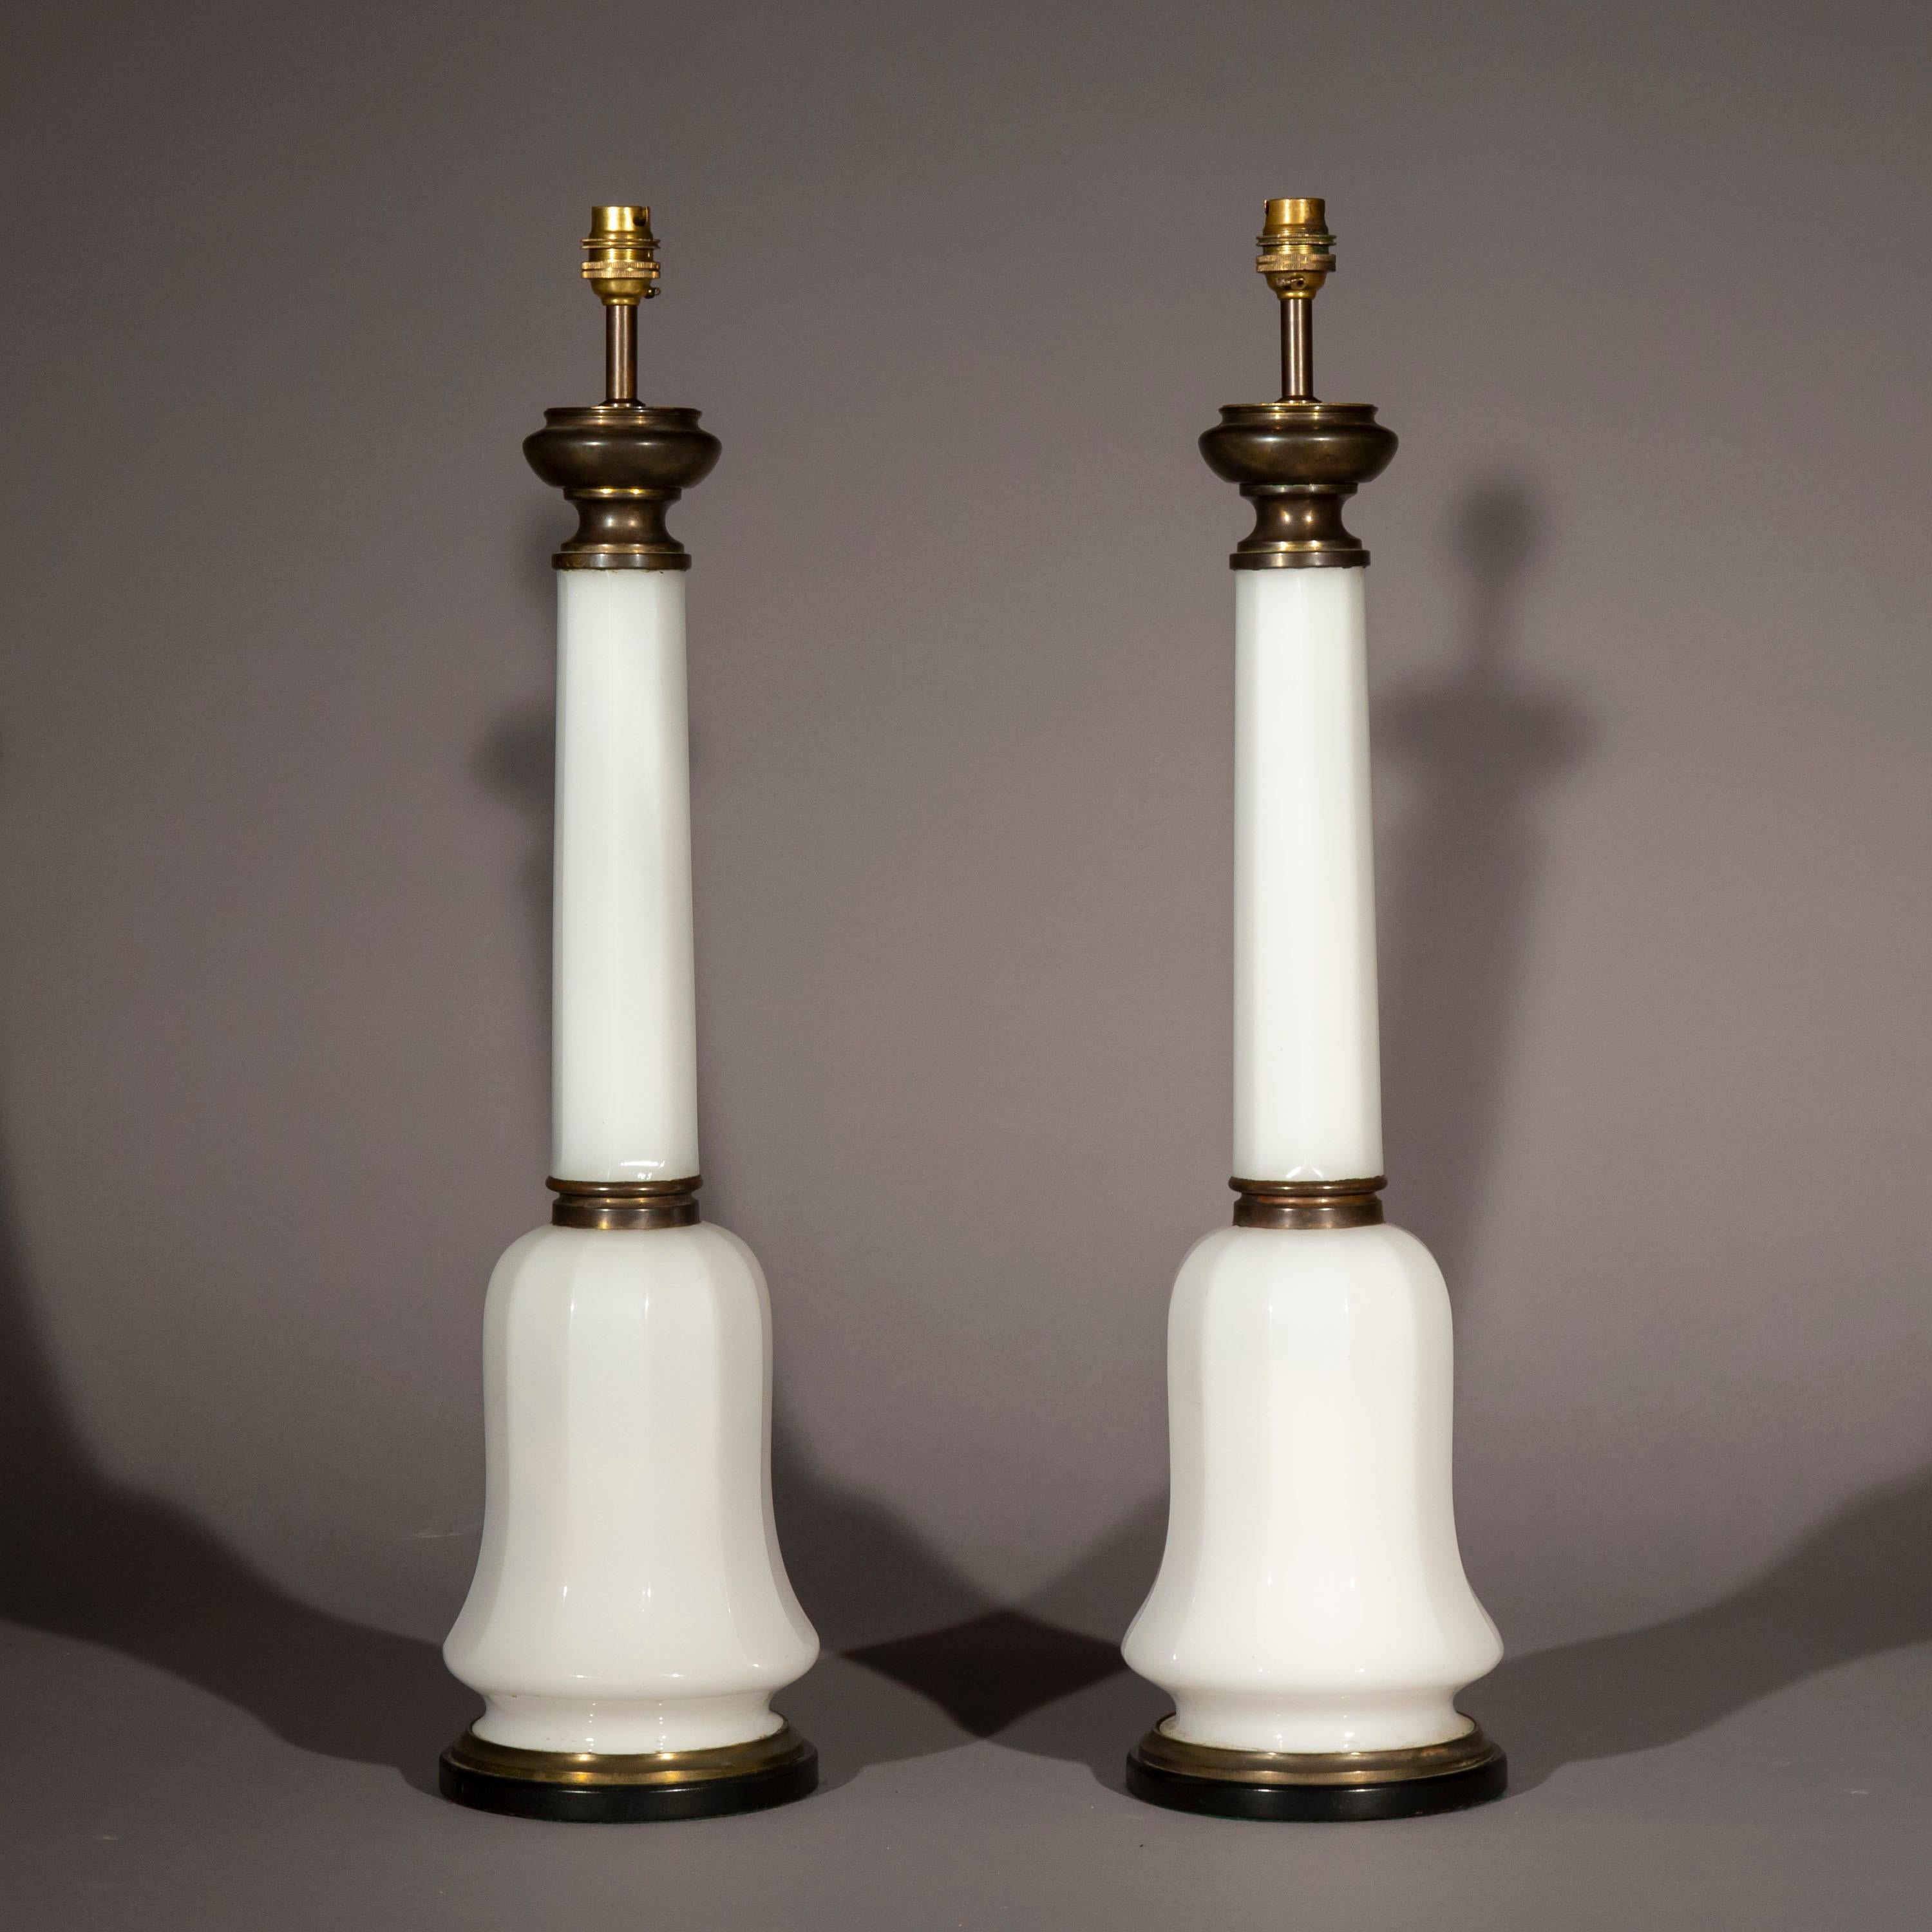 British Pair of Antique Opaline Glass Table Lamps, 19th Century